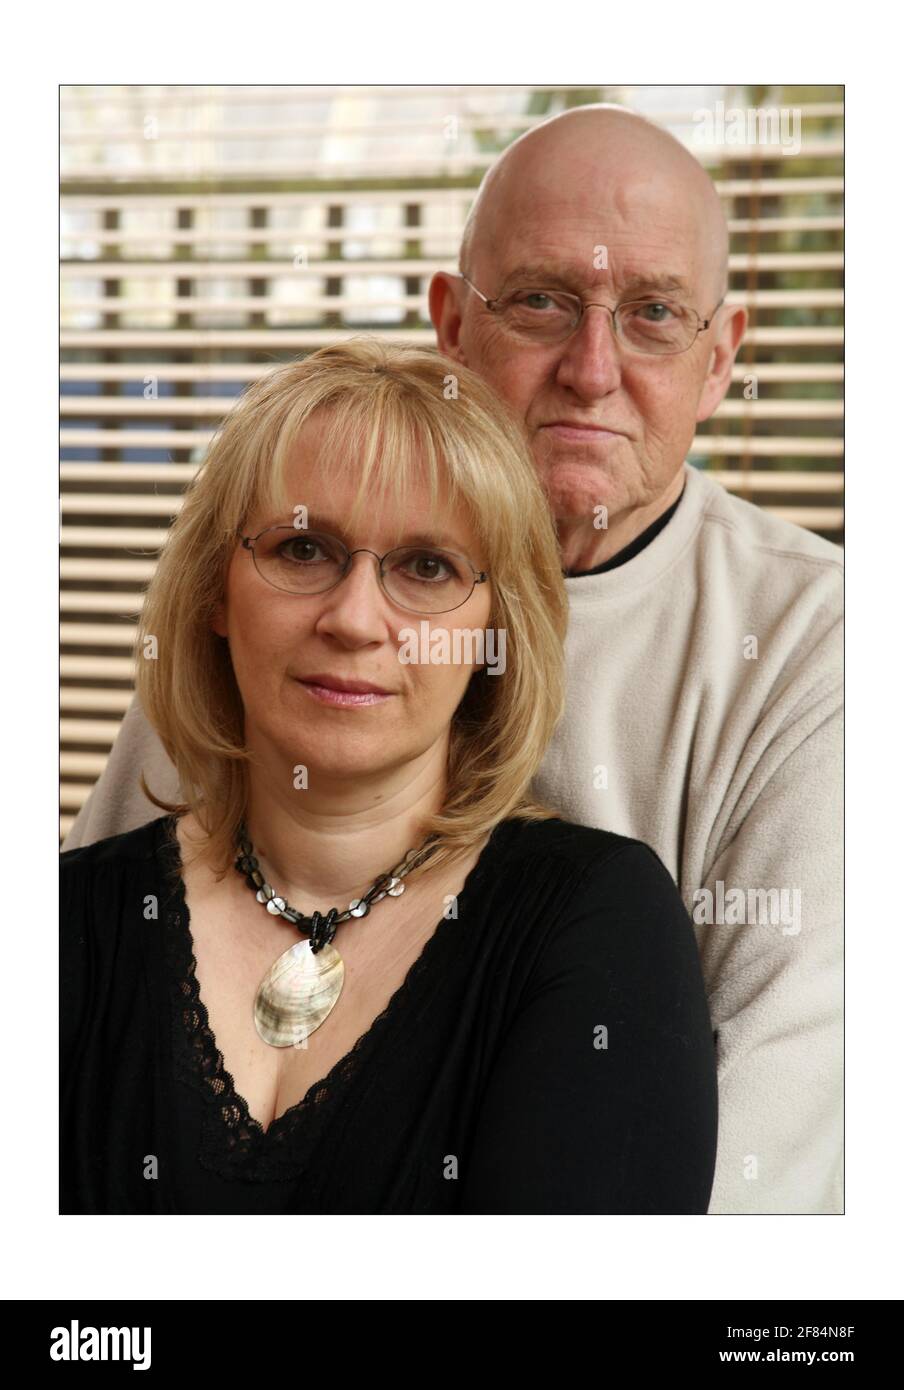 Victoria Summerley with her husband Craig at home in south west Londonphotograph by David Sandison The Independent Stock Photo